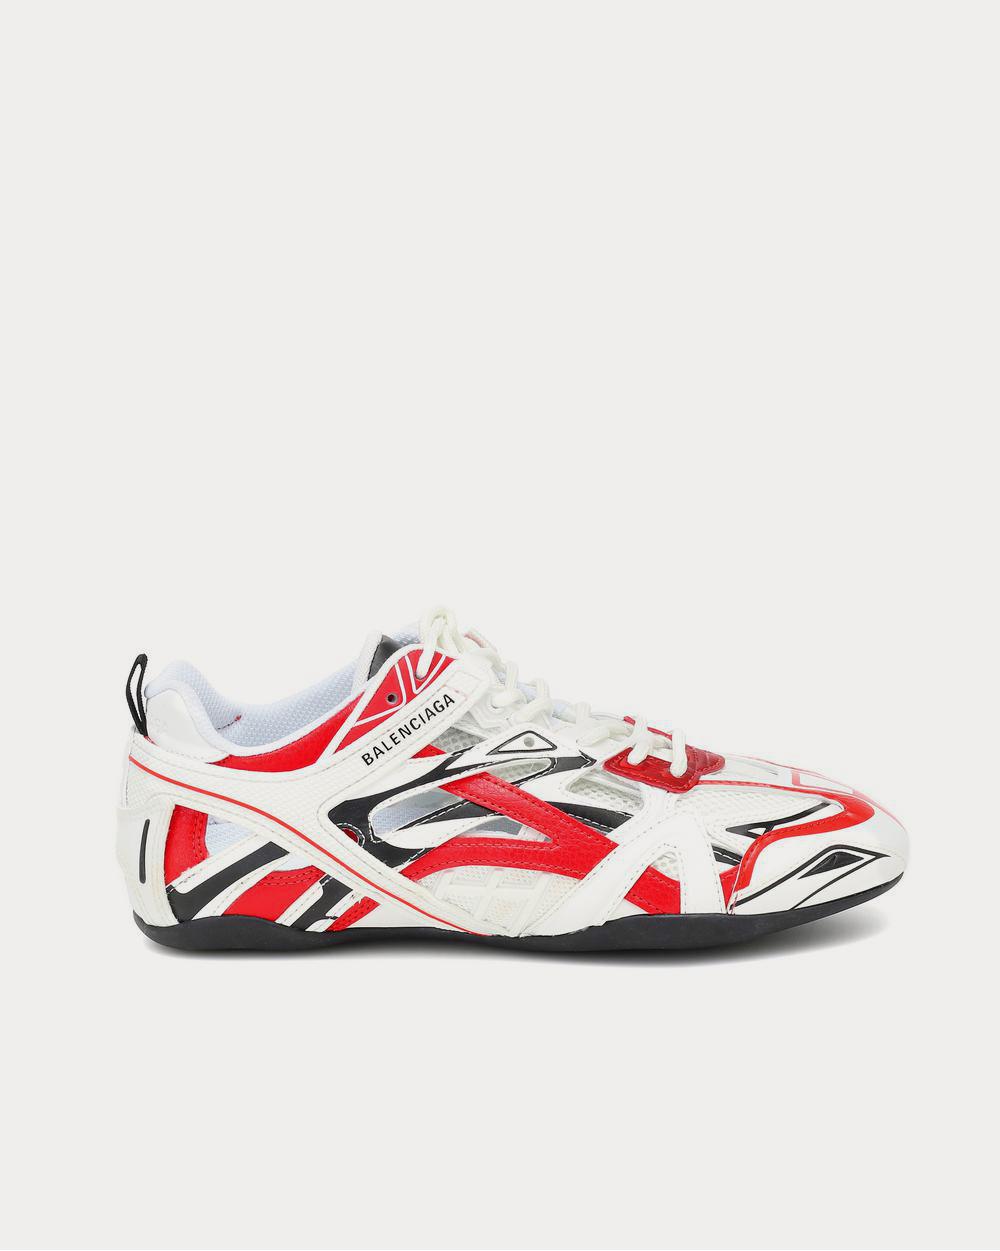 Balenciaga - Drive faux leather Red Low Top Sneakers